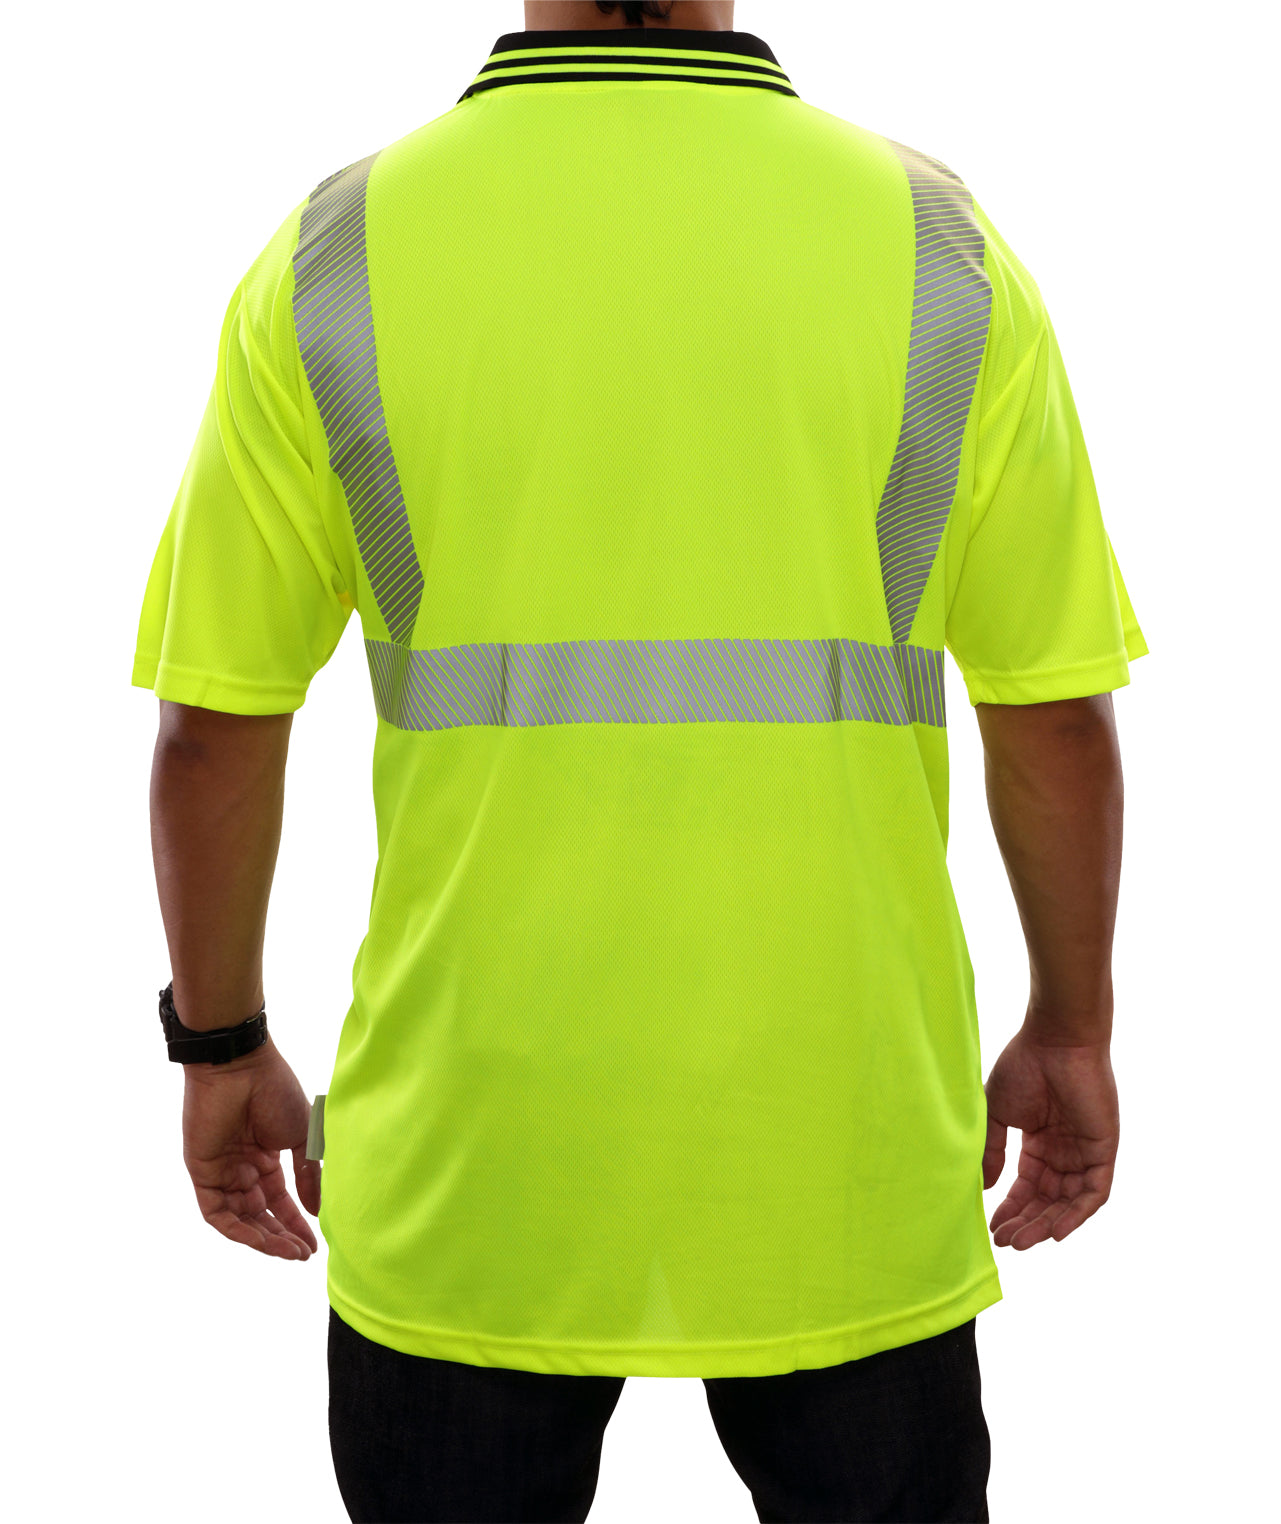 302CTLB Hi-Vis Two-Tone Birdseye Safety Polo Shirt with Comfort Trim by 3MTM